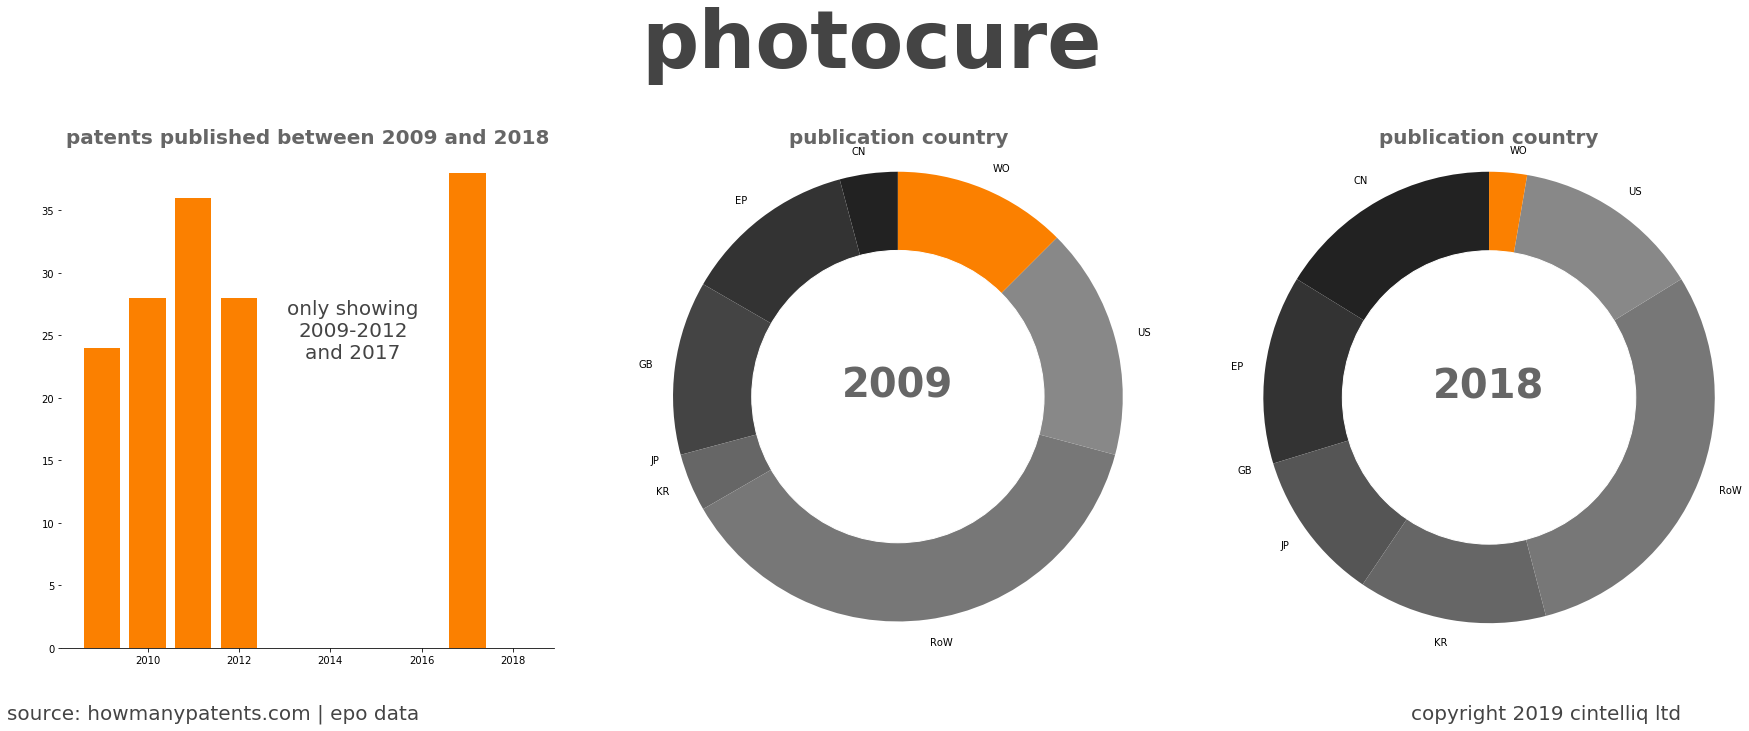 summary of patents for Photocure